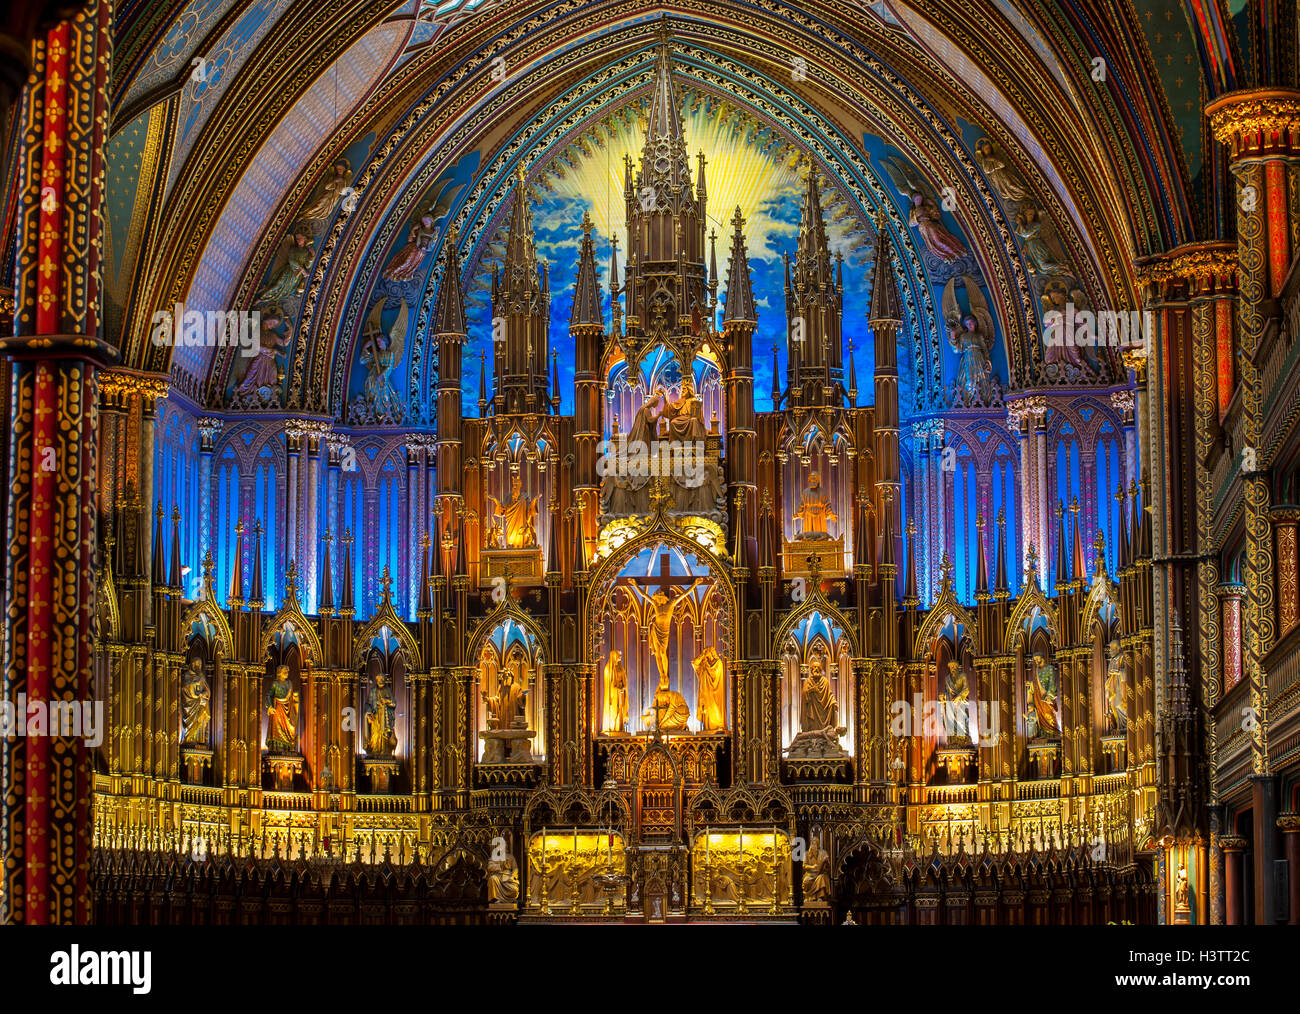 Interior of Notre Dame Basilica, Gothic Revival Architecture, built between 1824 and 1829, Montreal, Quebec, Canada Stock Photo